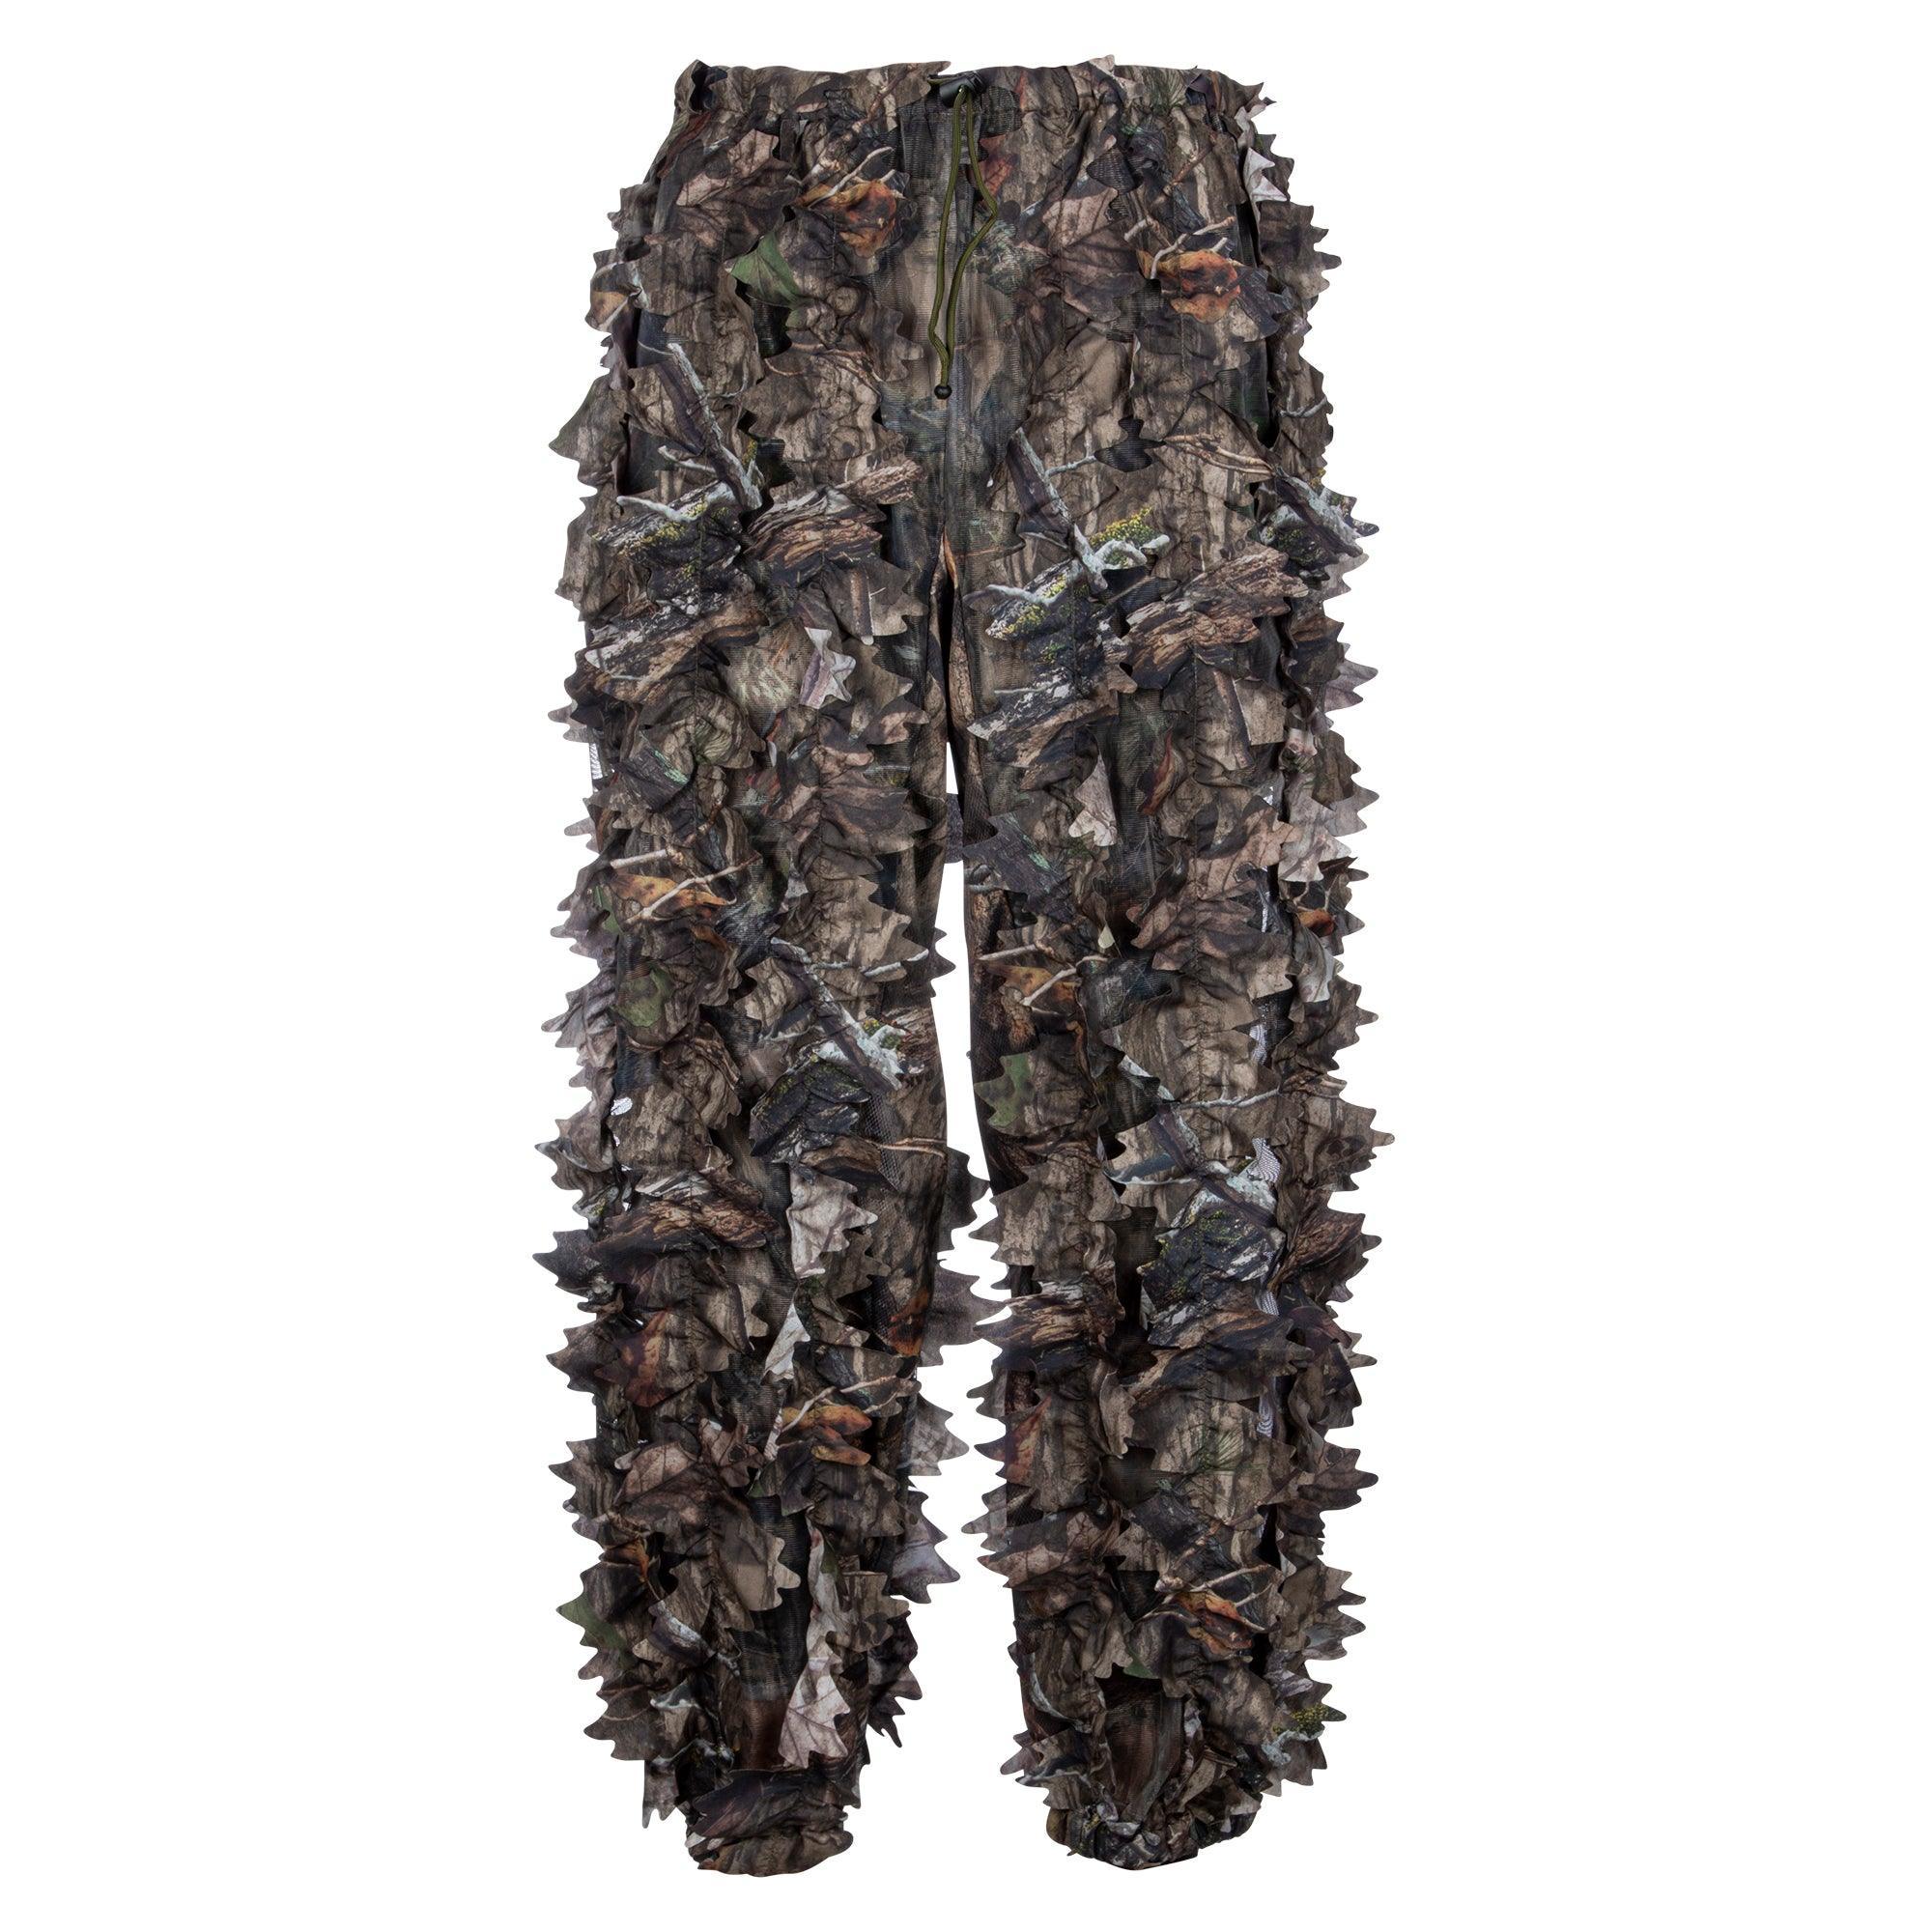 Country DNA – The Mossy Oak Store